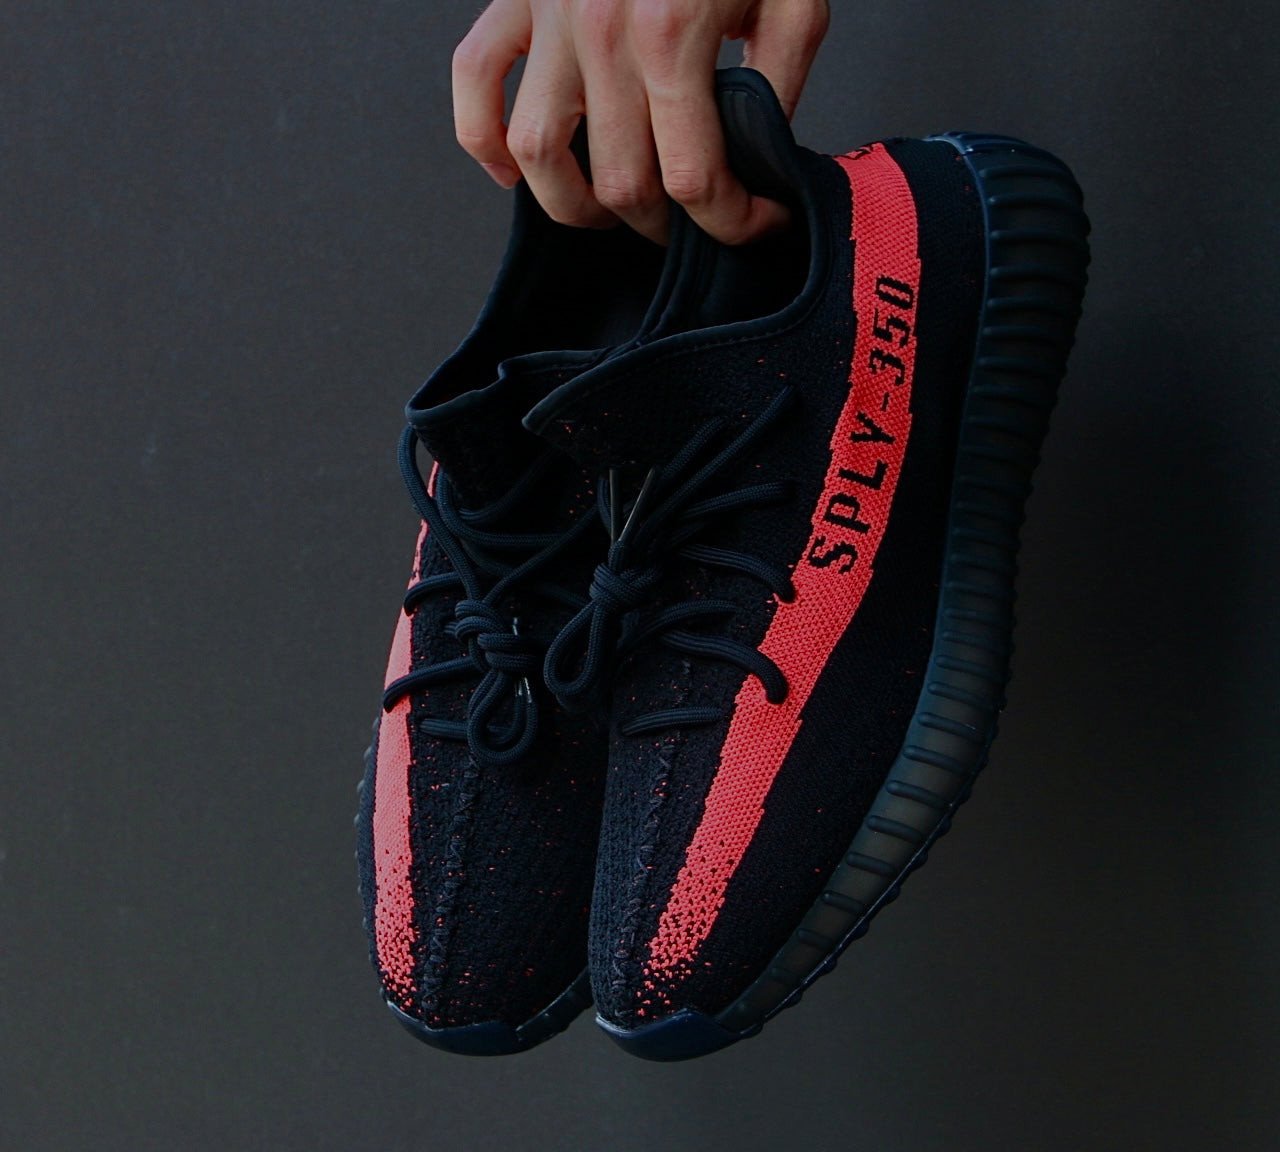 Yeezy 350 - why does everyone want them ?